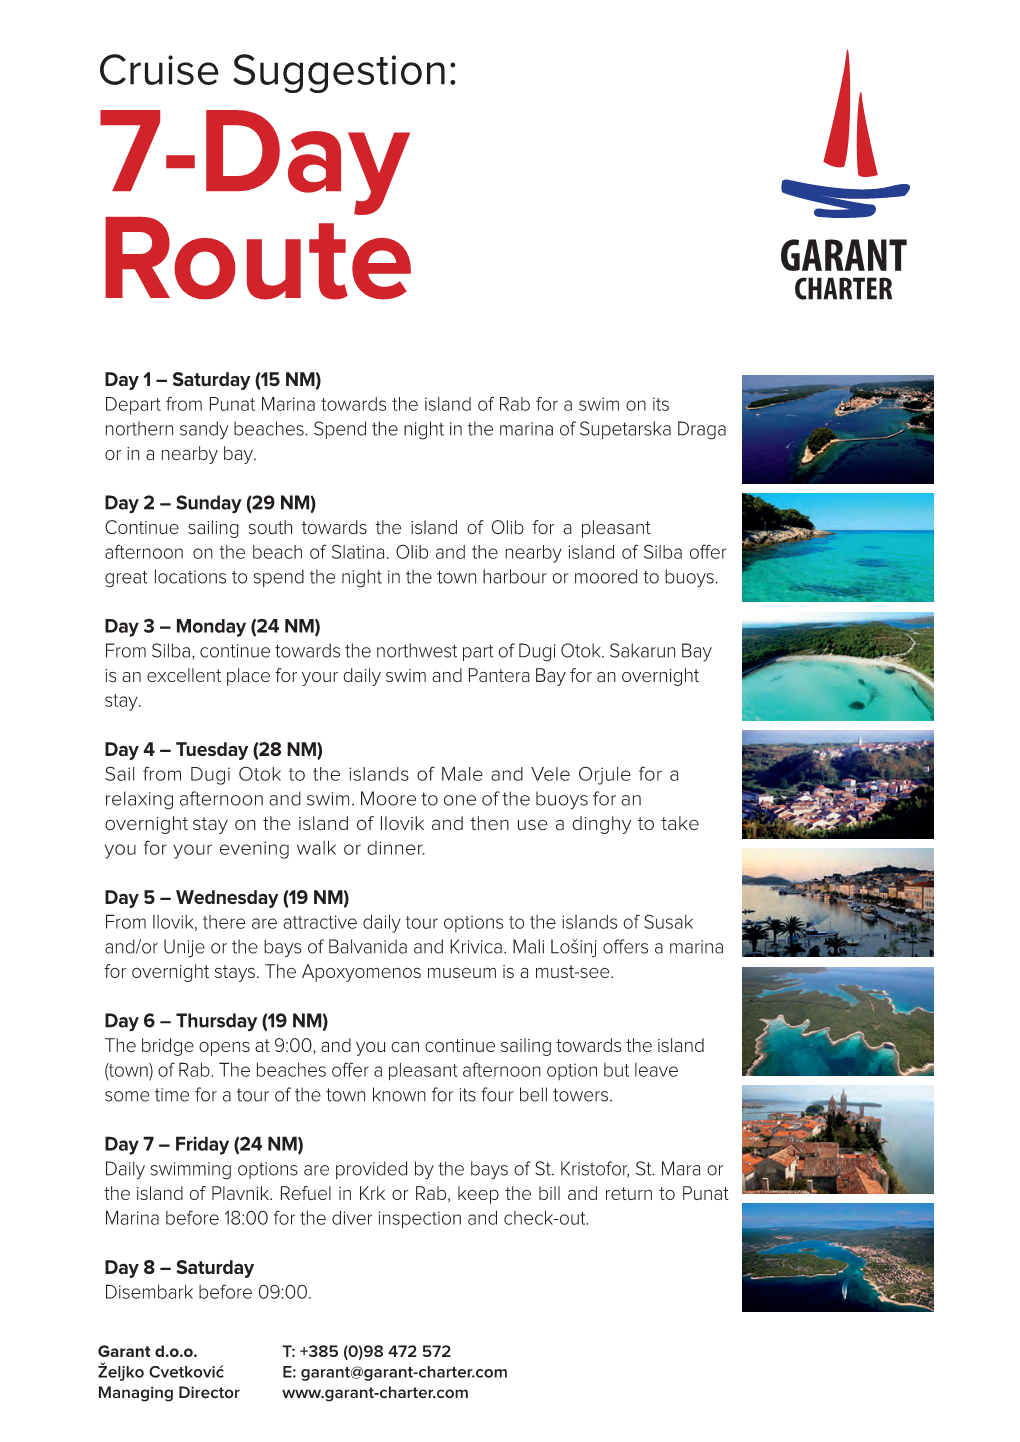 Cruise Suggestion: 7-Day Route